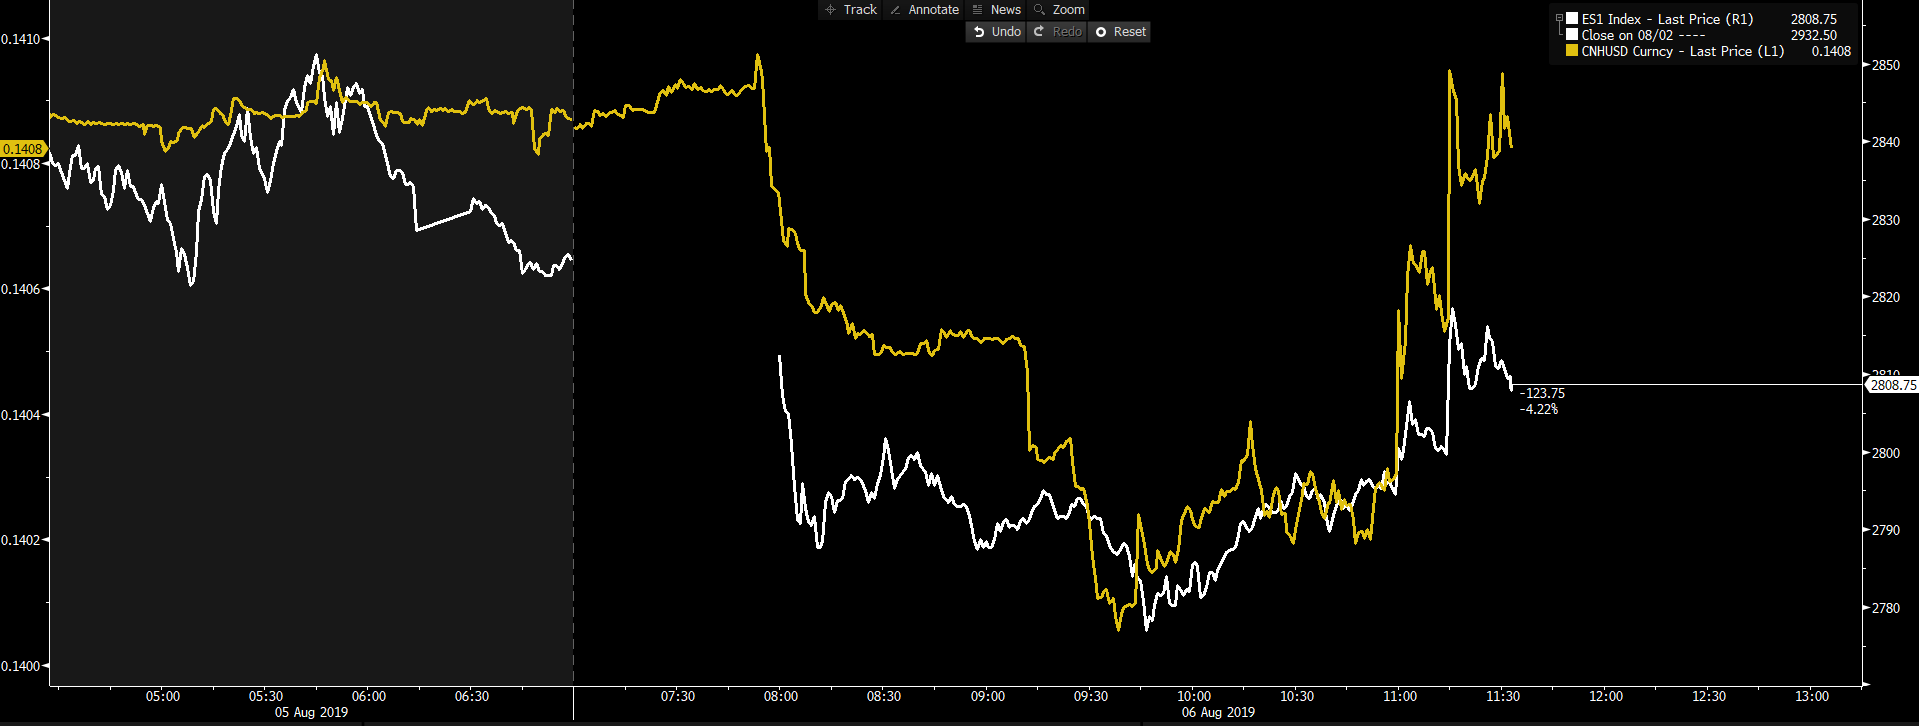 Yellow: USDCNH (inverted). White: S&P 500 futures.